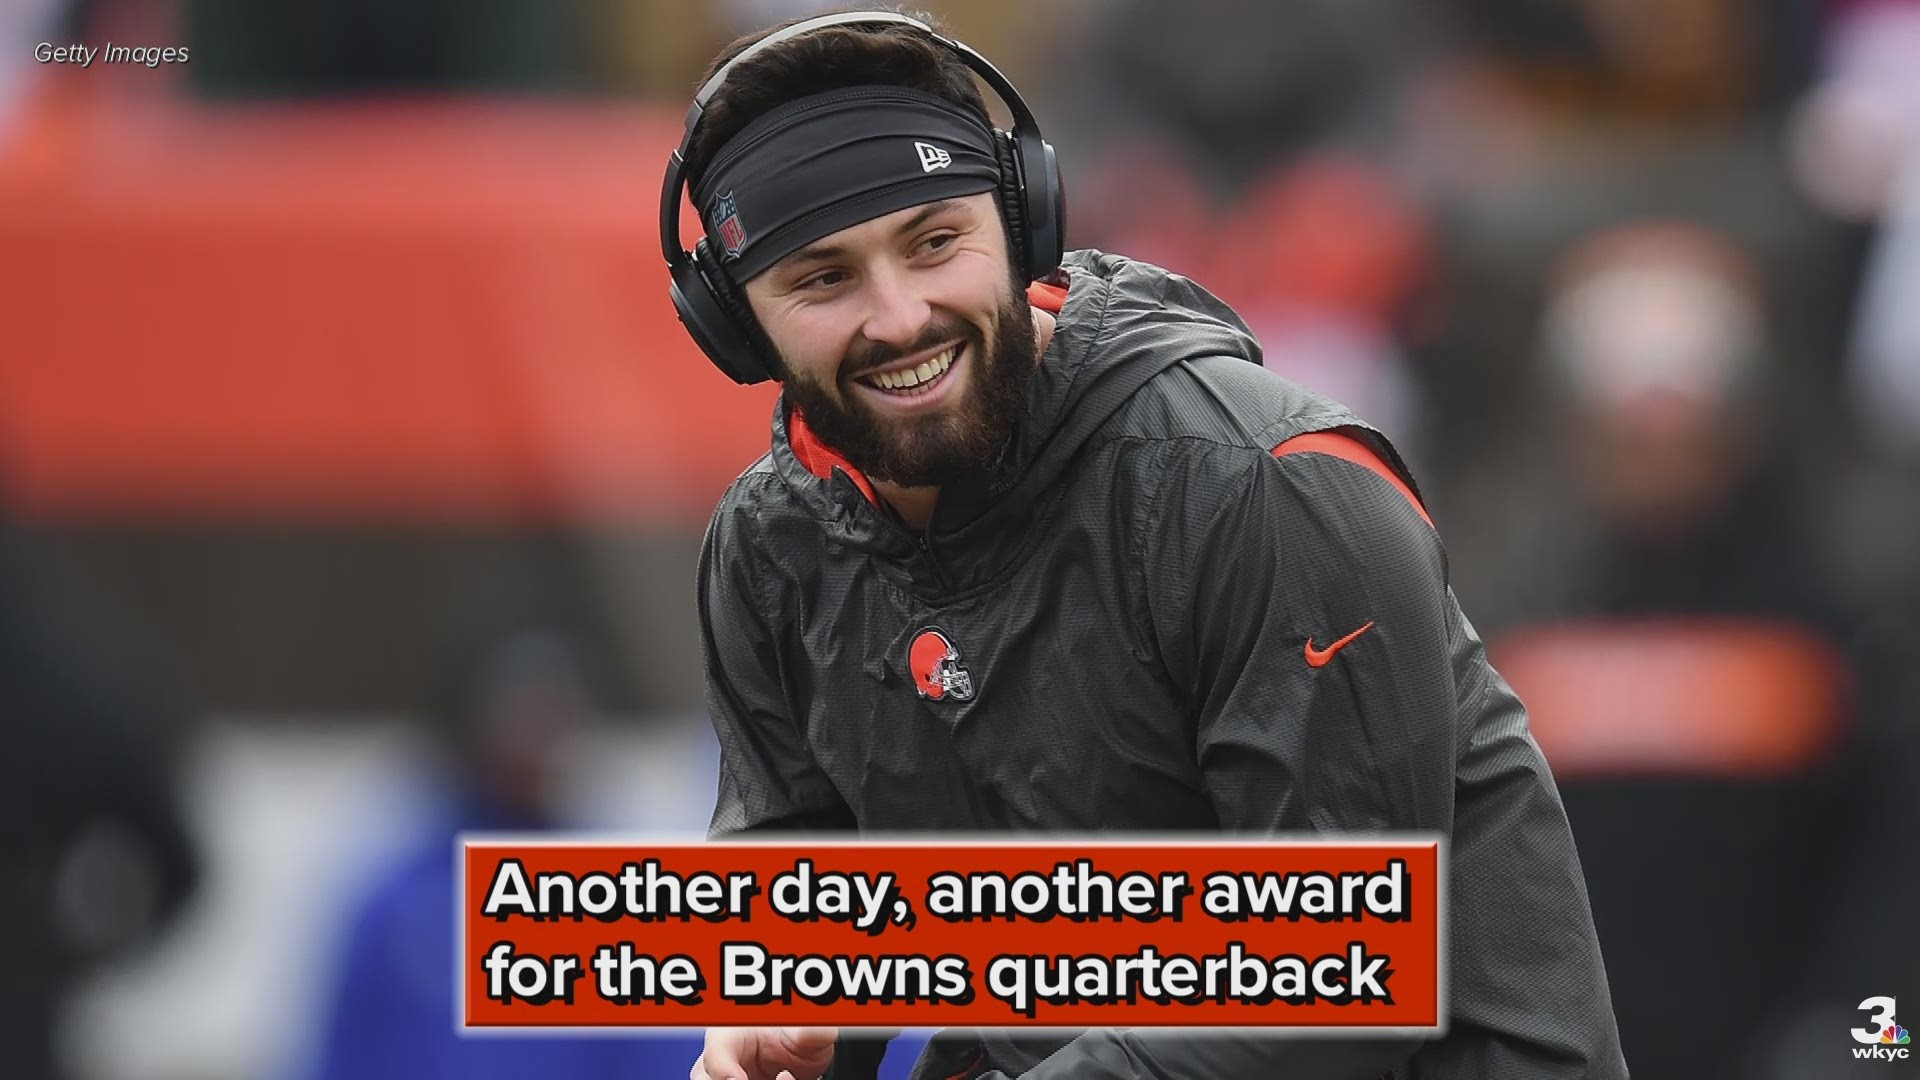 Cleveland Browns quarterback Baker Mayfield was named the PFWA Rookie of the Year Award winner Tuesday.